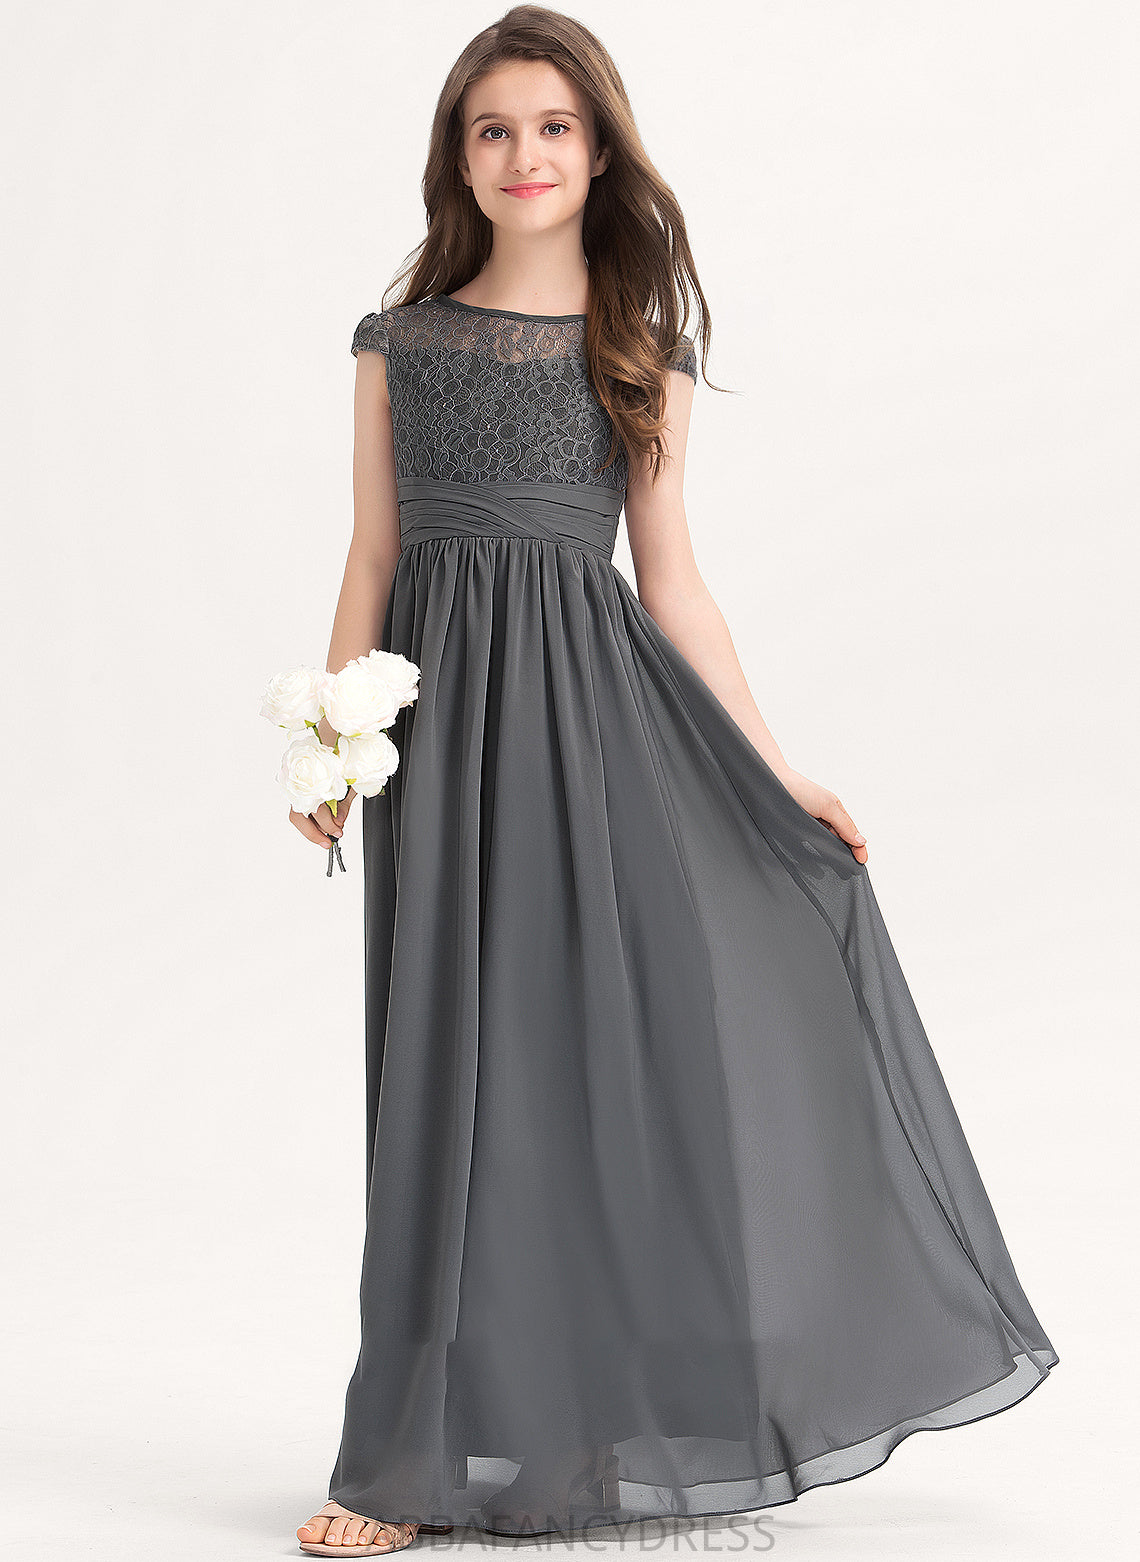 Scoop Neck Floor-Length Junior Bridesmaid Dresses Amber Chiffon Lace Ruffle A-Line With